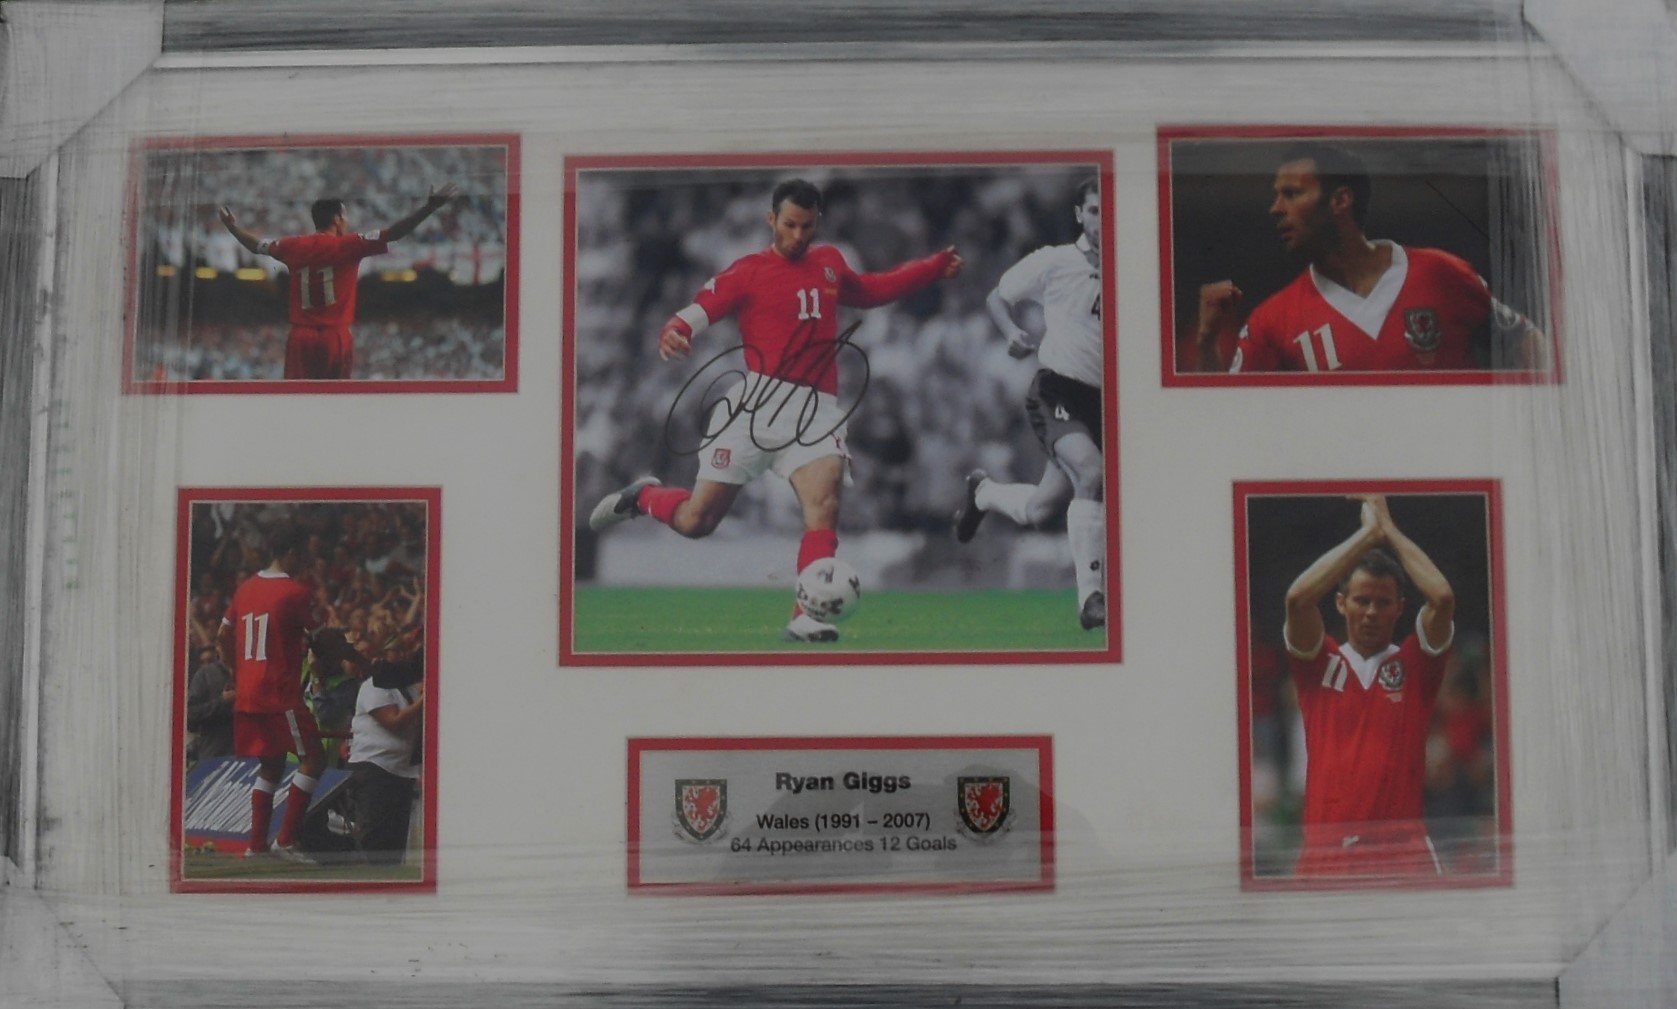 RYAN GIGGS WALES FRAMED HAND SIGNED DISPLAY. MANCHESTER UNITED INTEREST